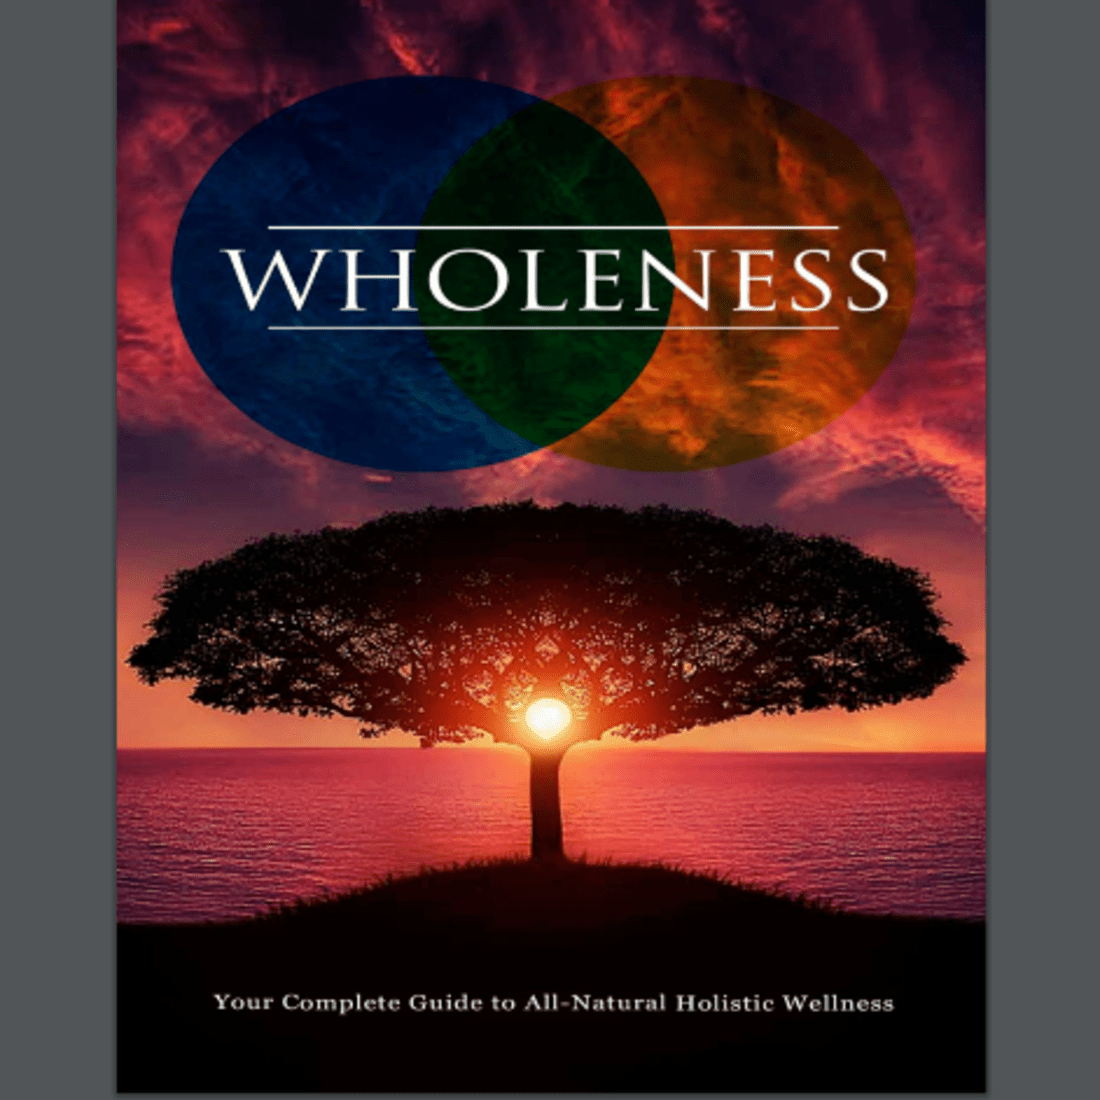 Your Complete Guide To All Natural Holistic Wellness Ebook cover image.